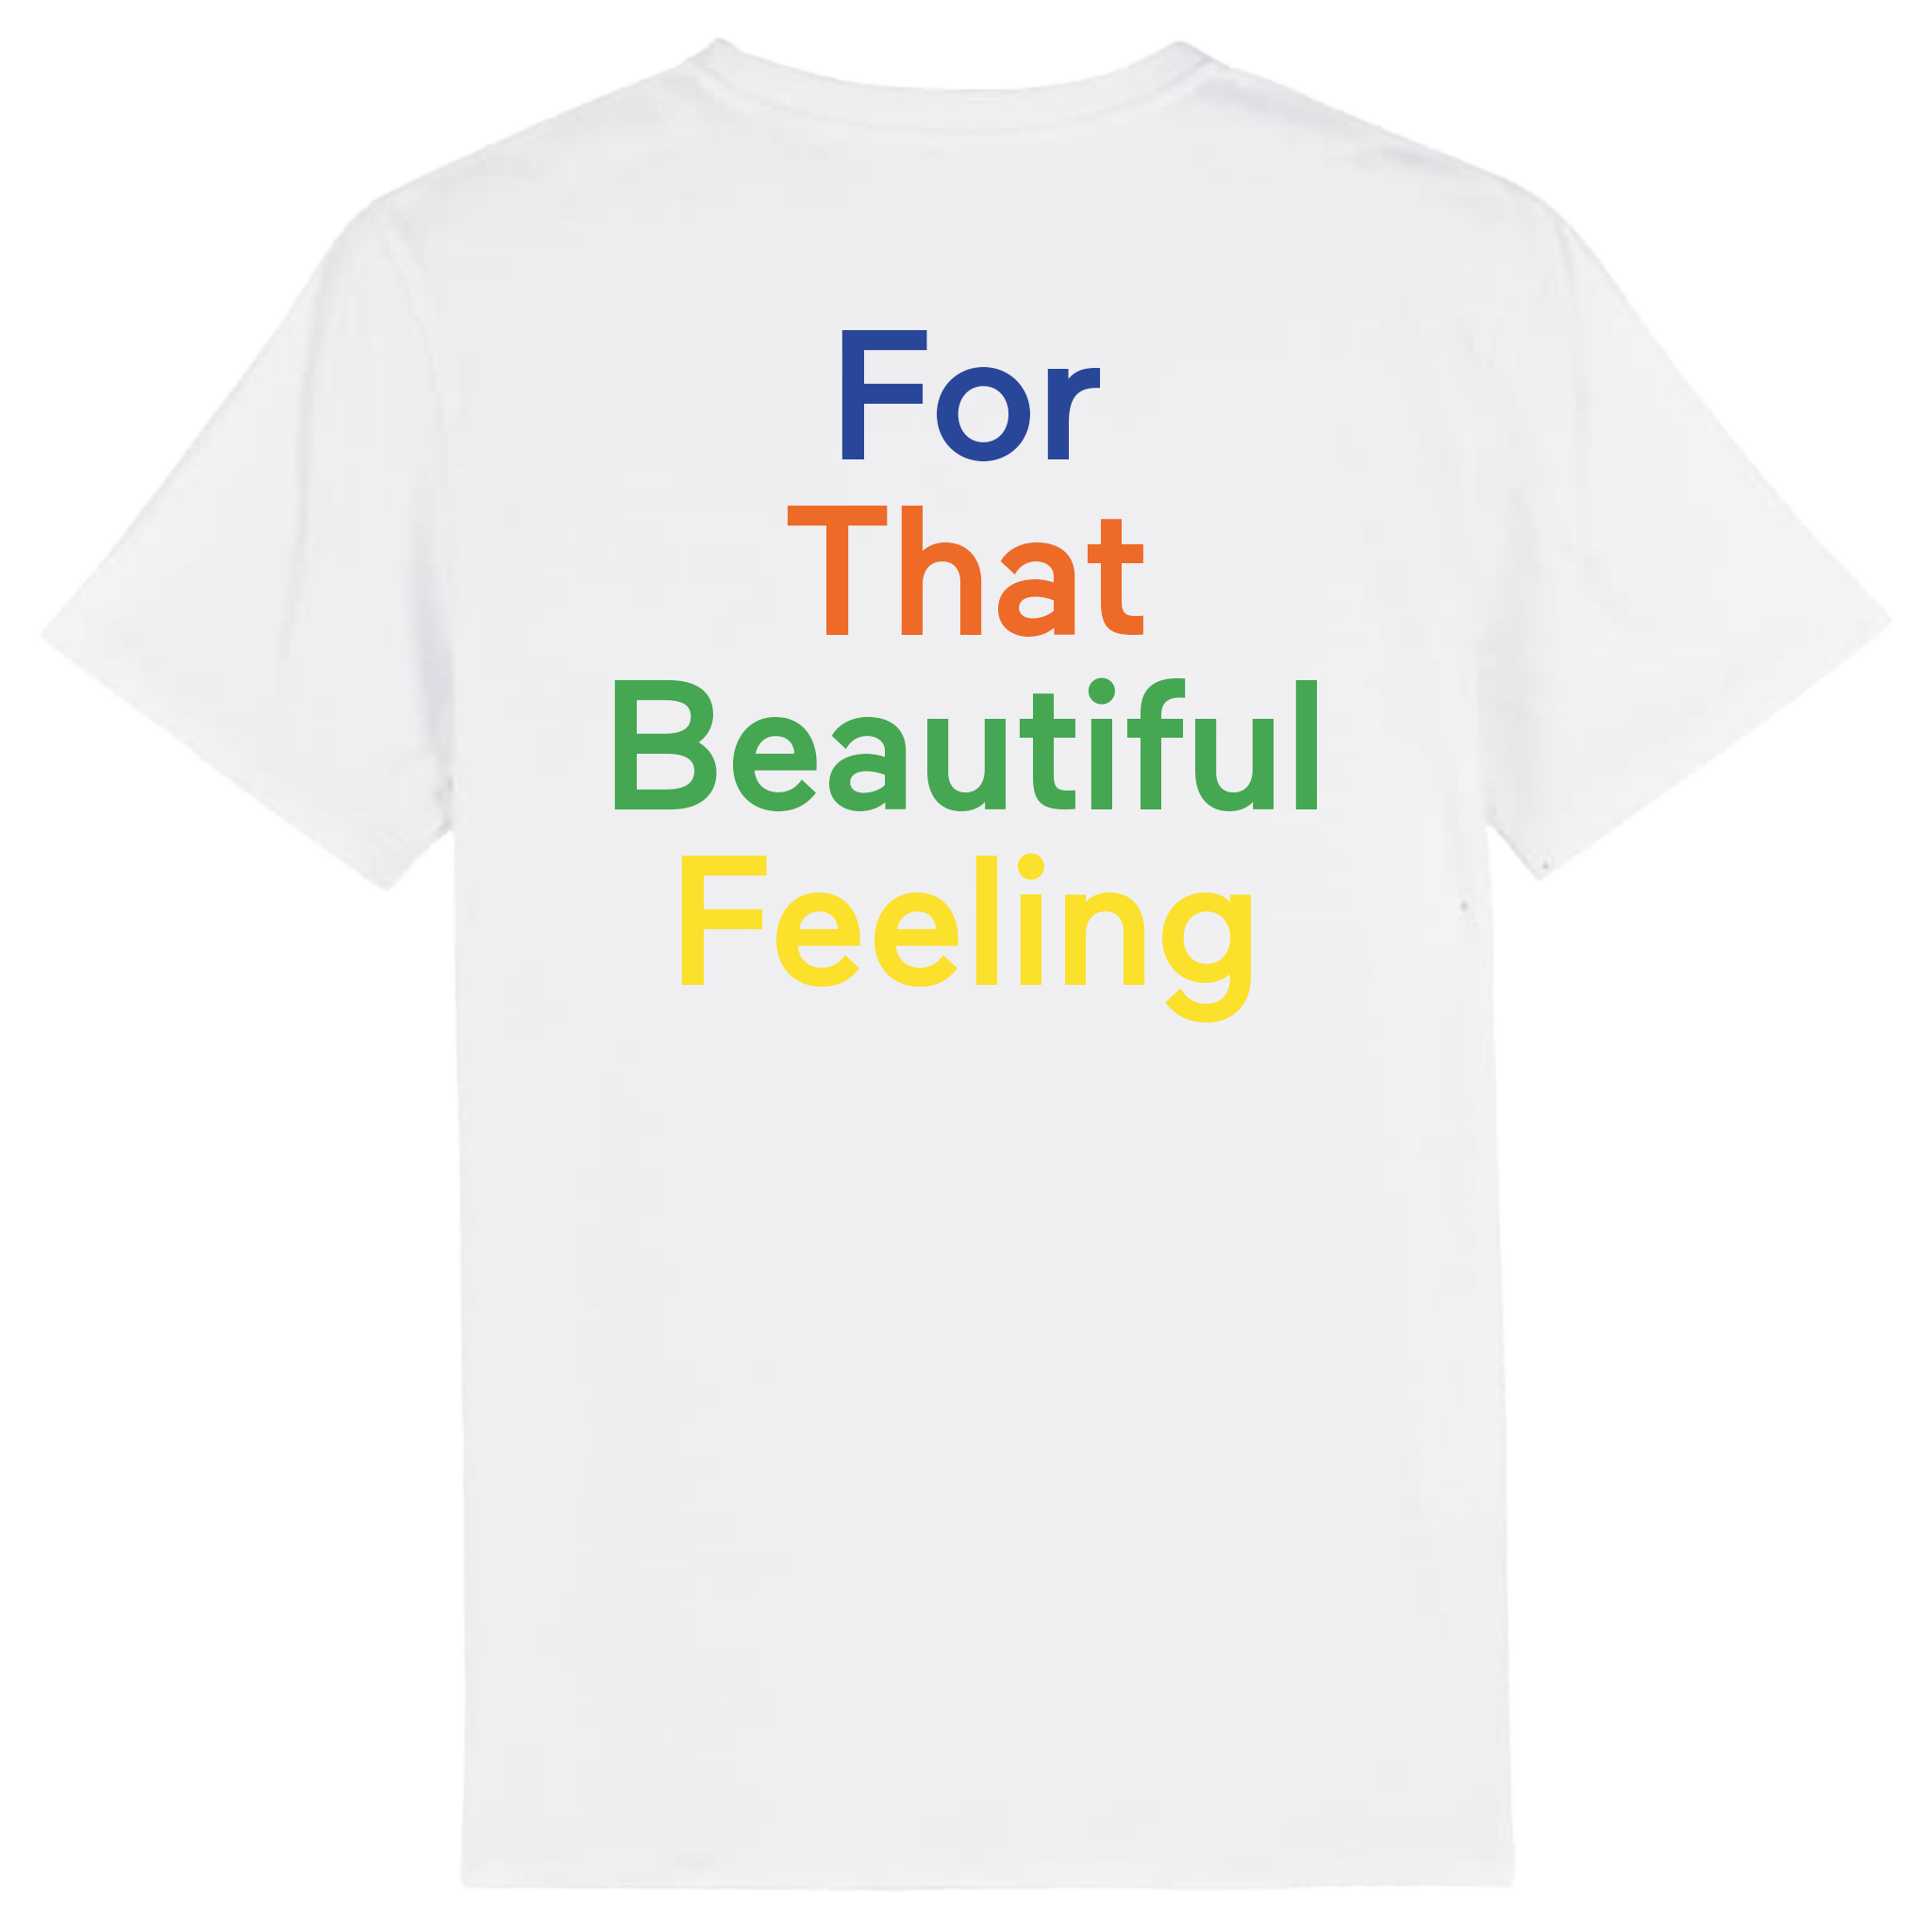 FOR THAT BEAUTIFUL FEELING WHITE T-SHIRT